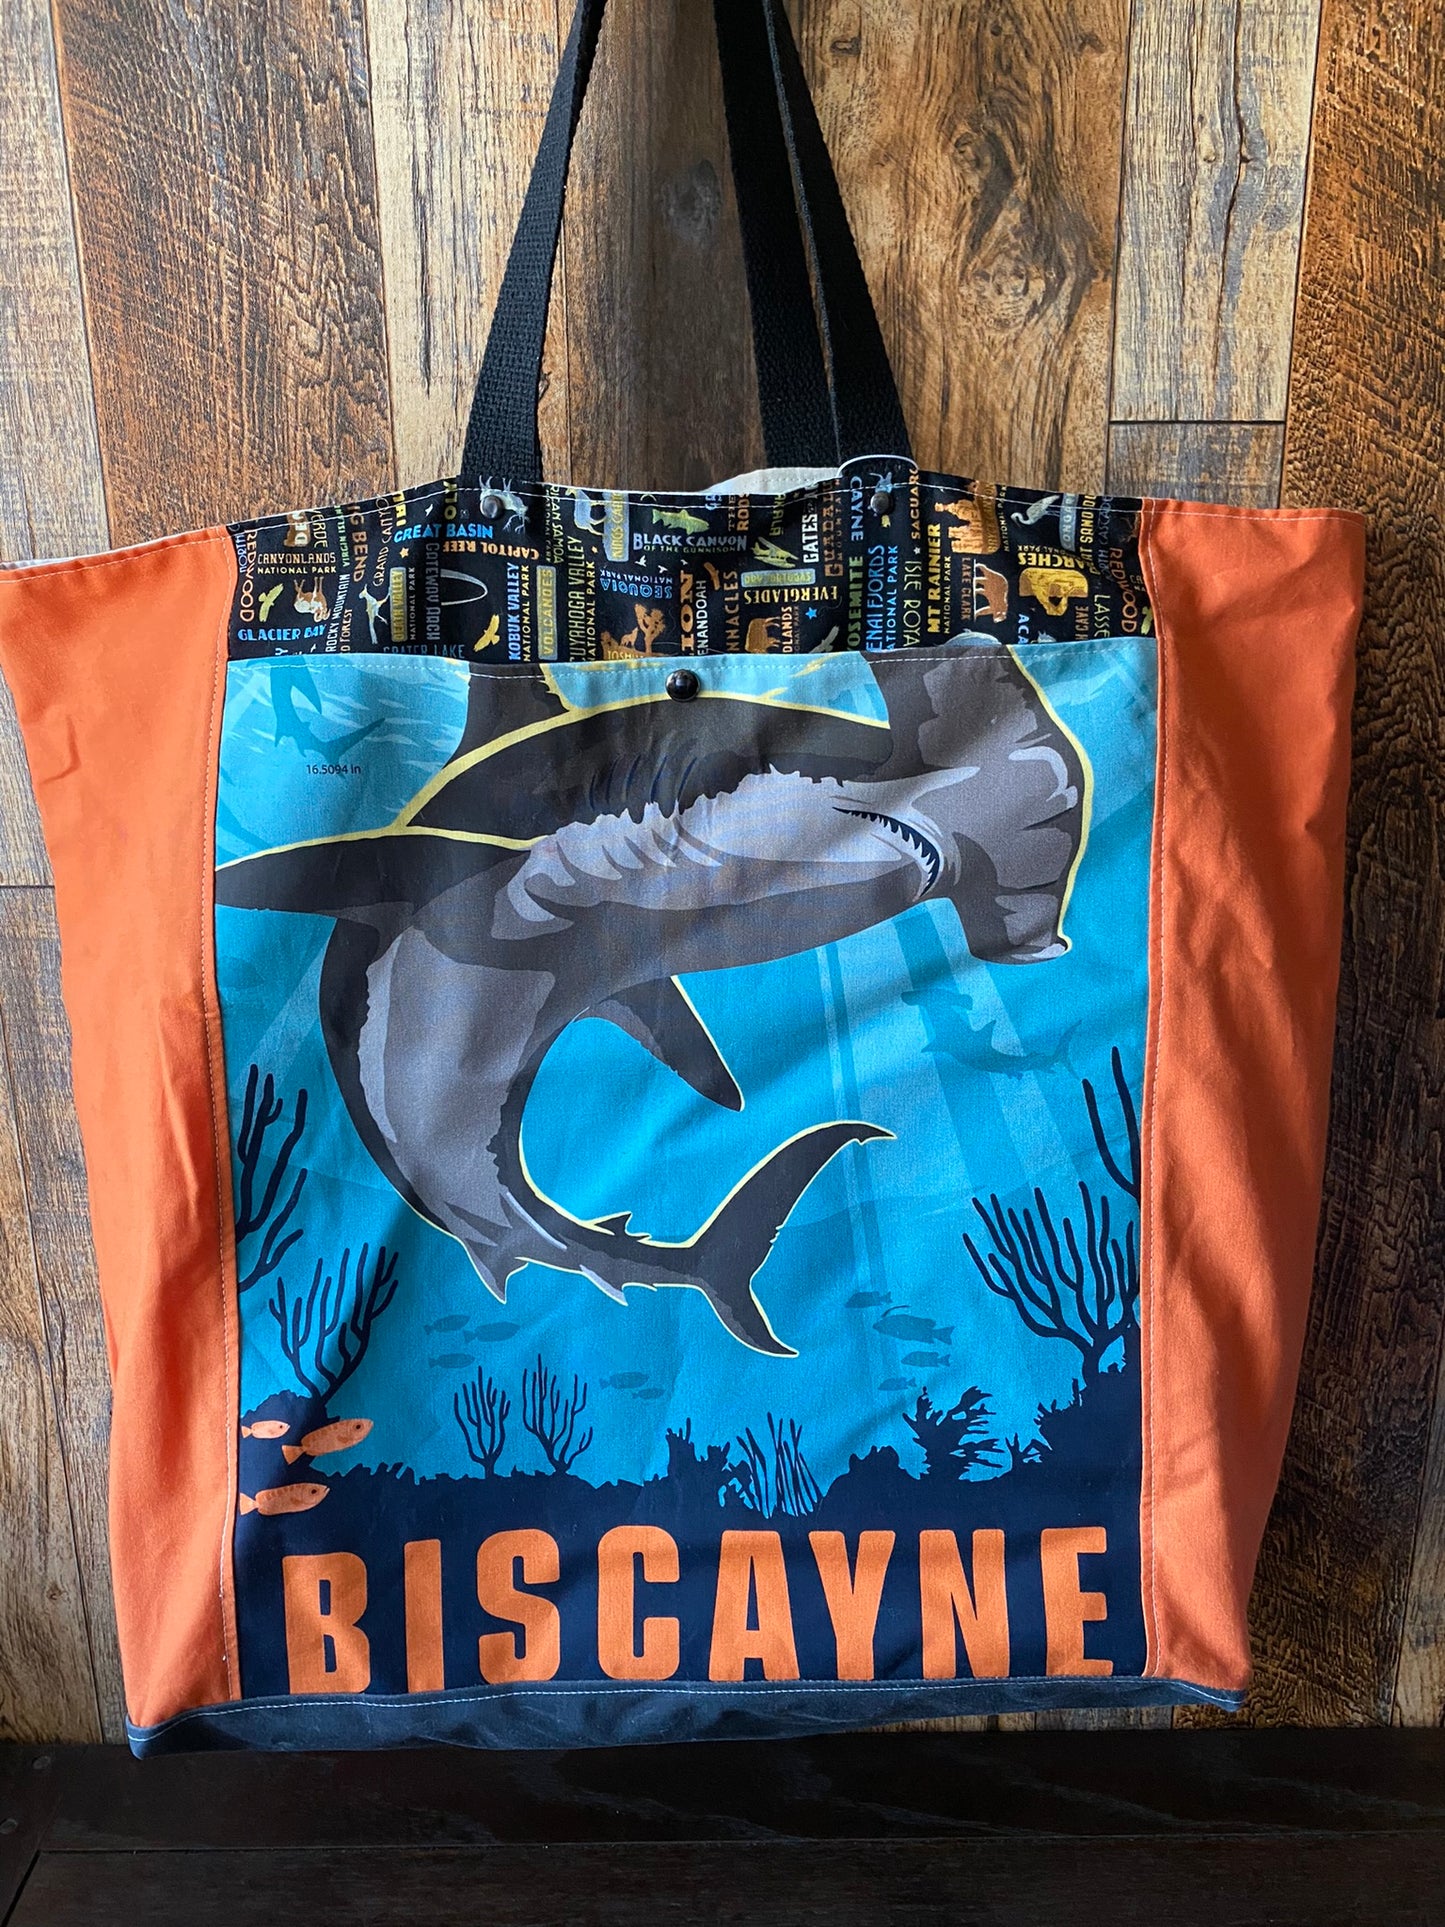 Extra Large and Lightweight Project or Festival Bag - Bay of Biscayne